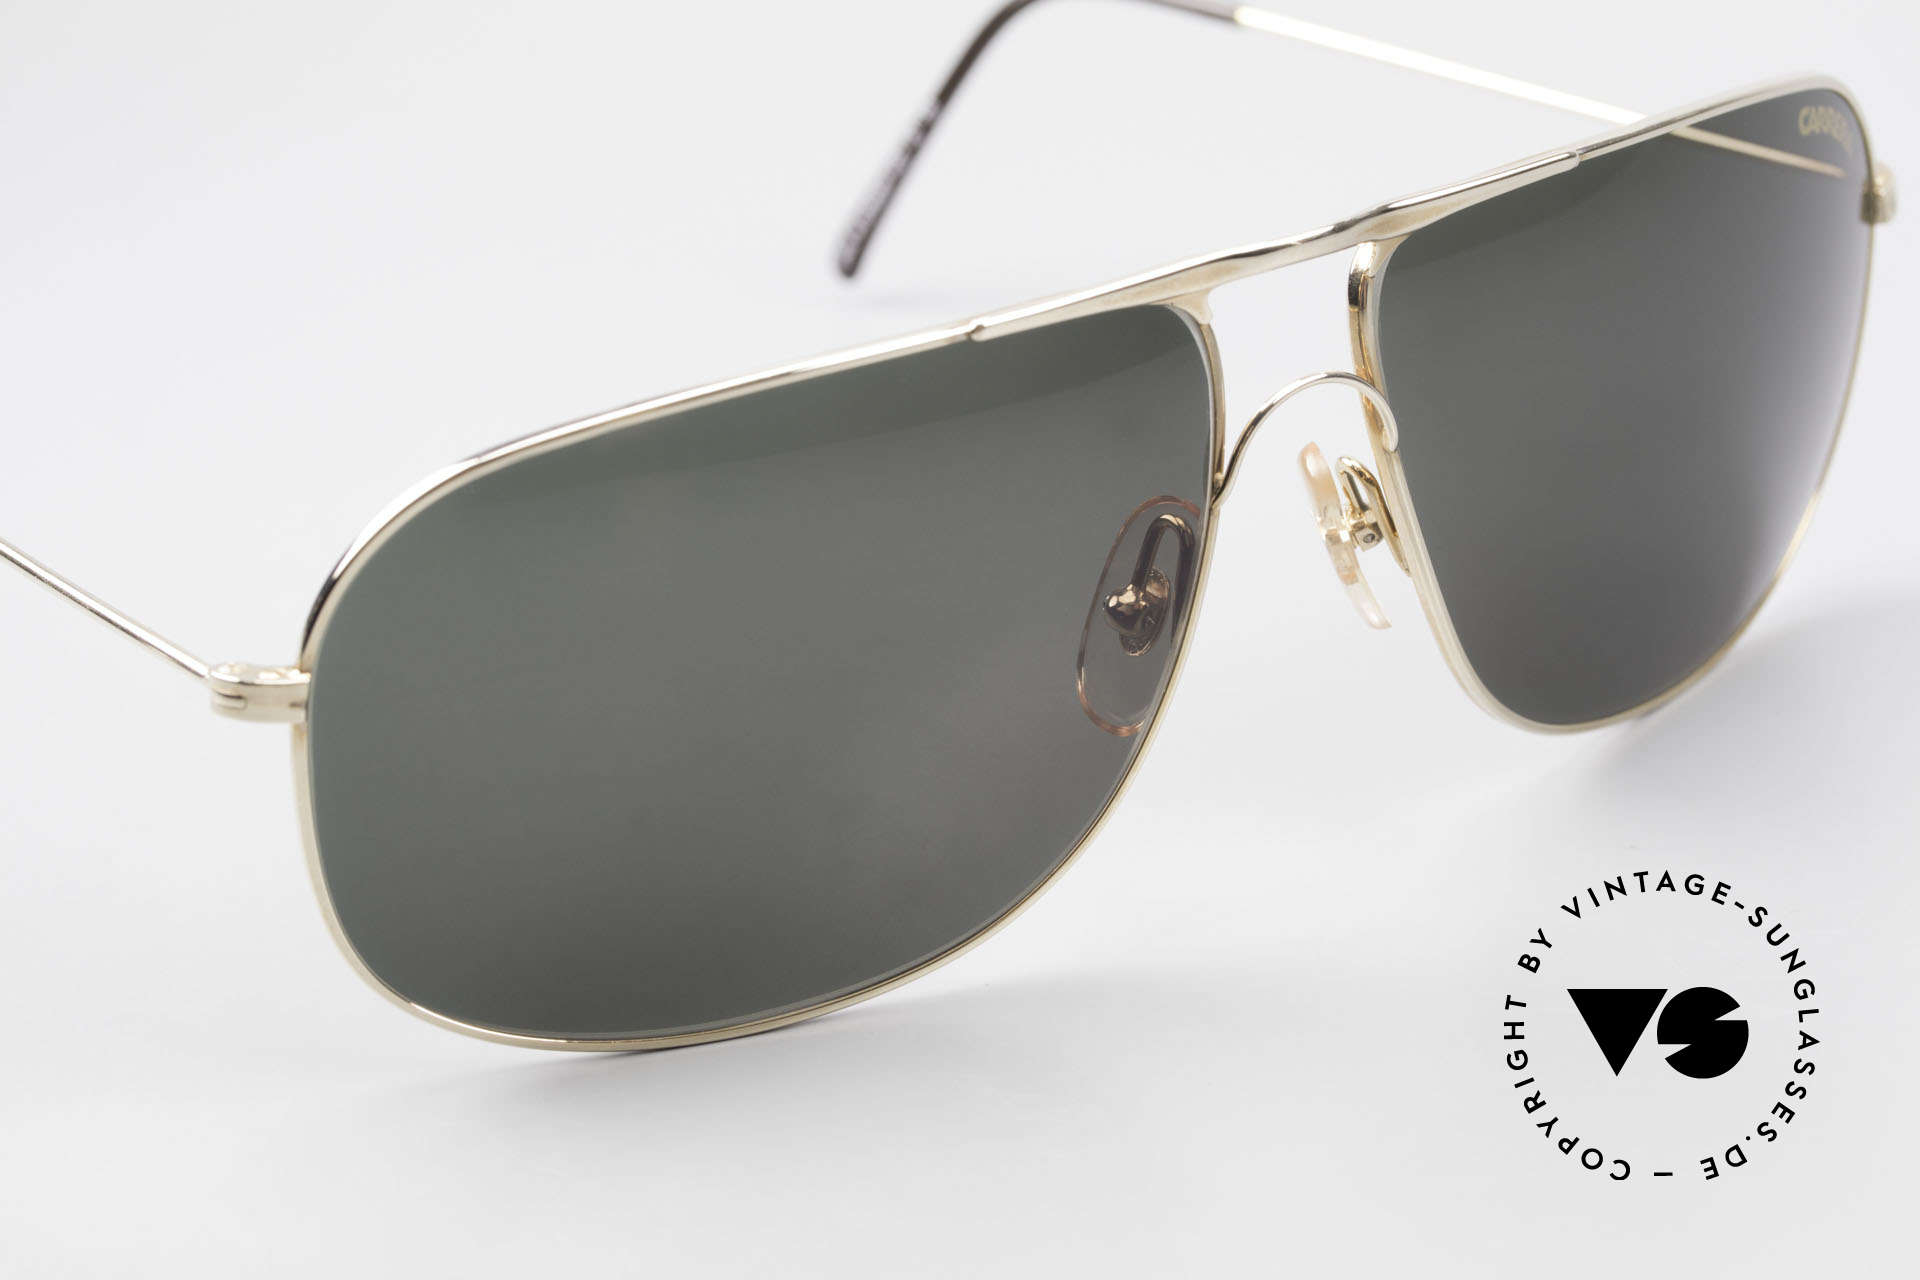 Carrera 5422 Shades With 3 Sets of Lenses, unworn, NOS (like all our VINTAGE Carrera sunglasses), Made for Men